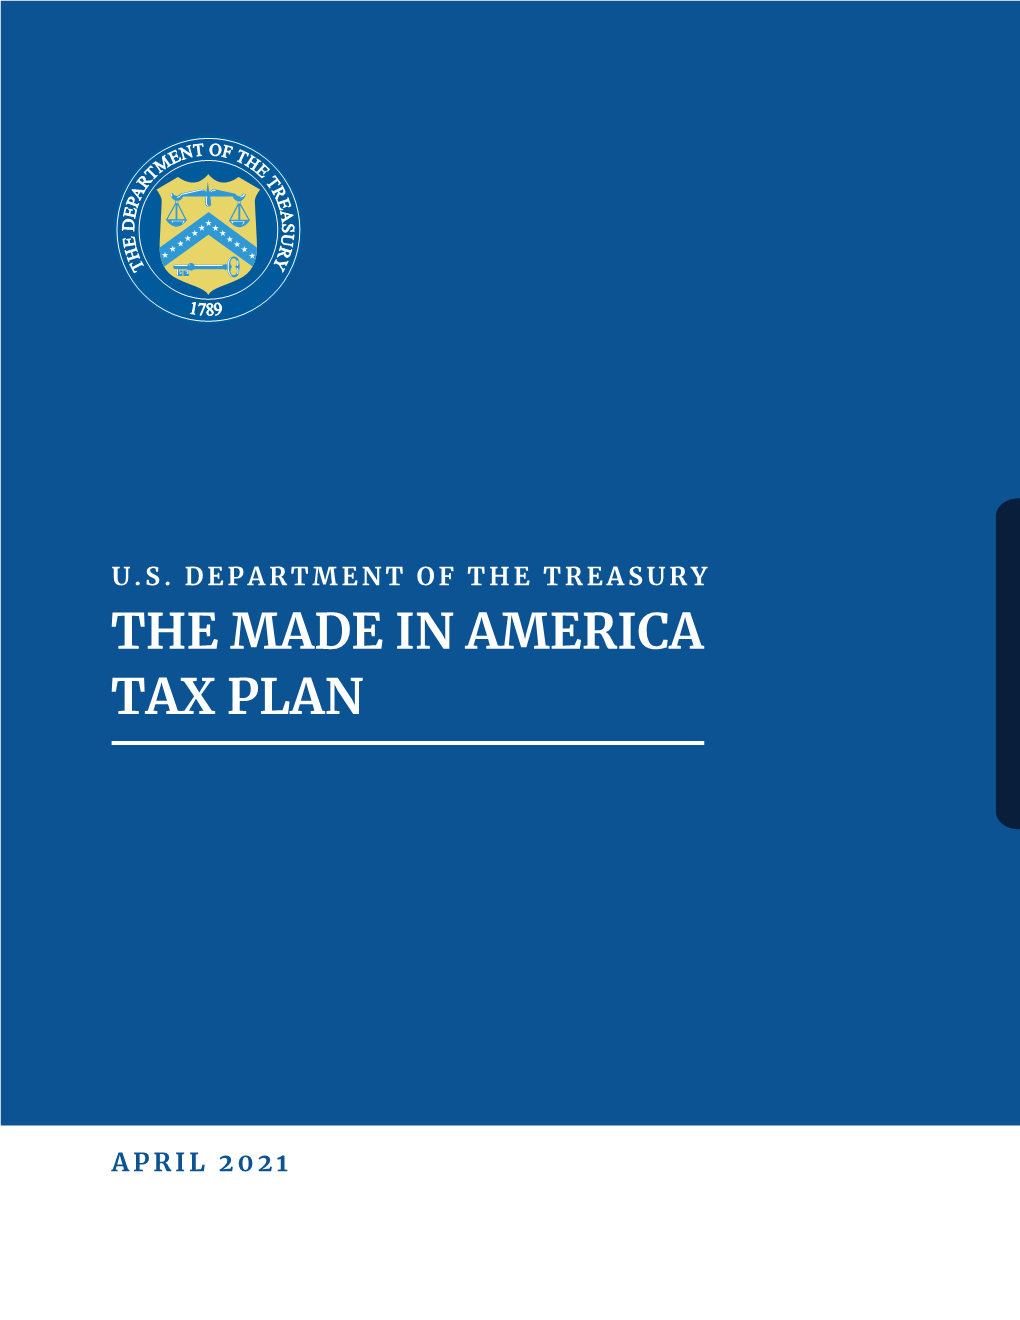 U.S. Department of Treasury, Report on the Made in America Tax Plan